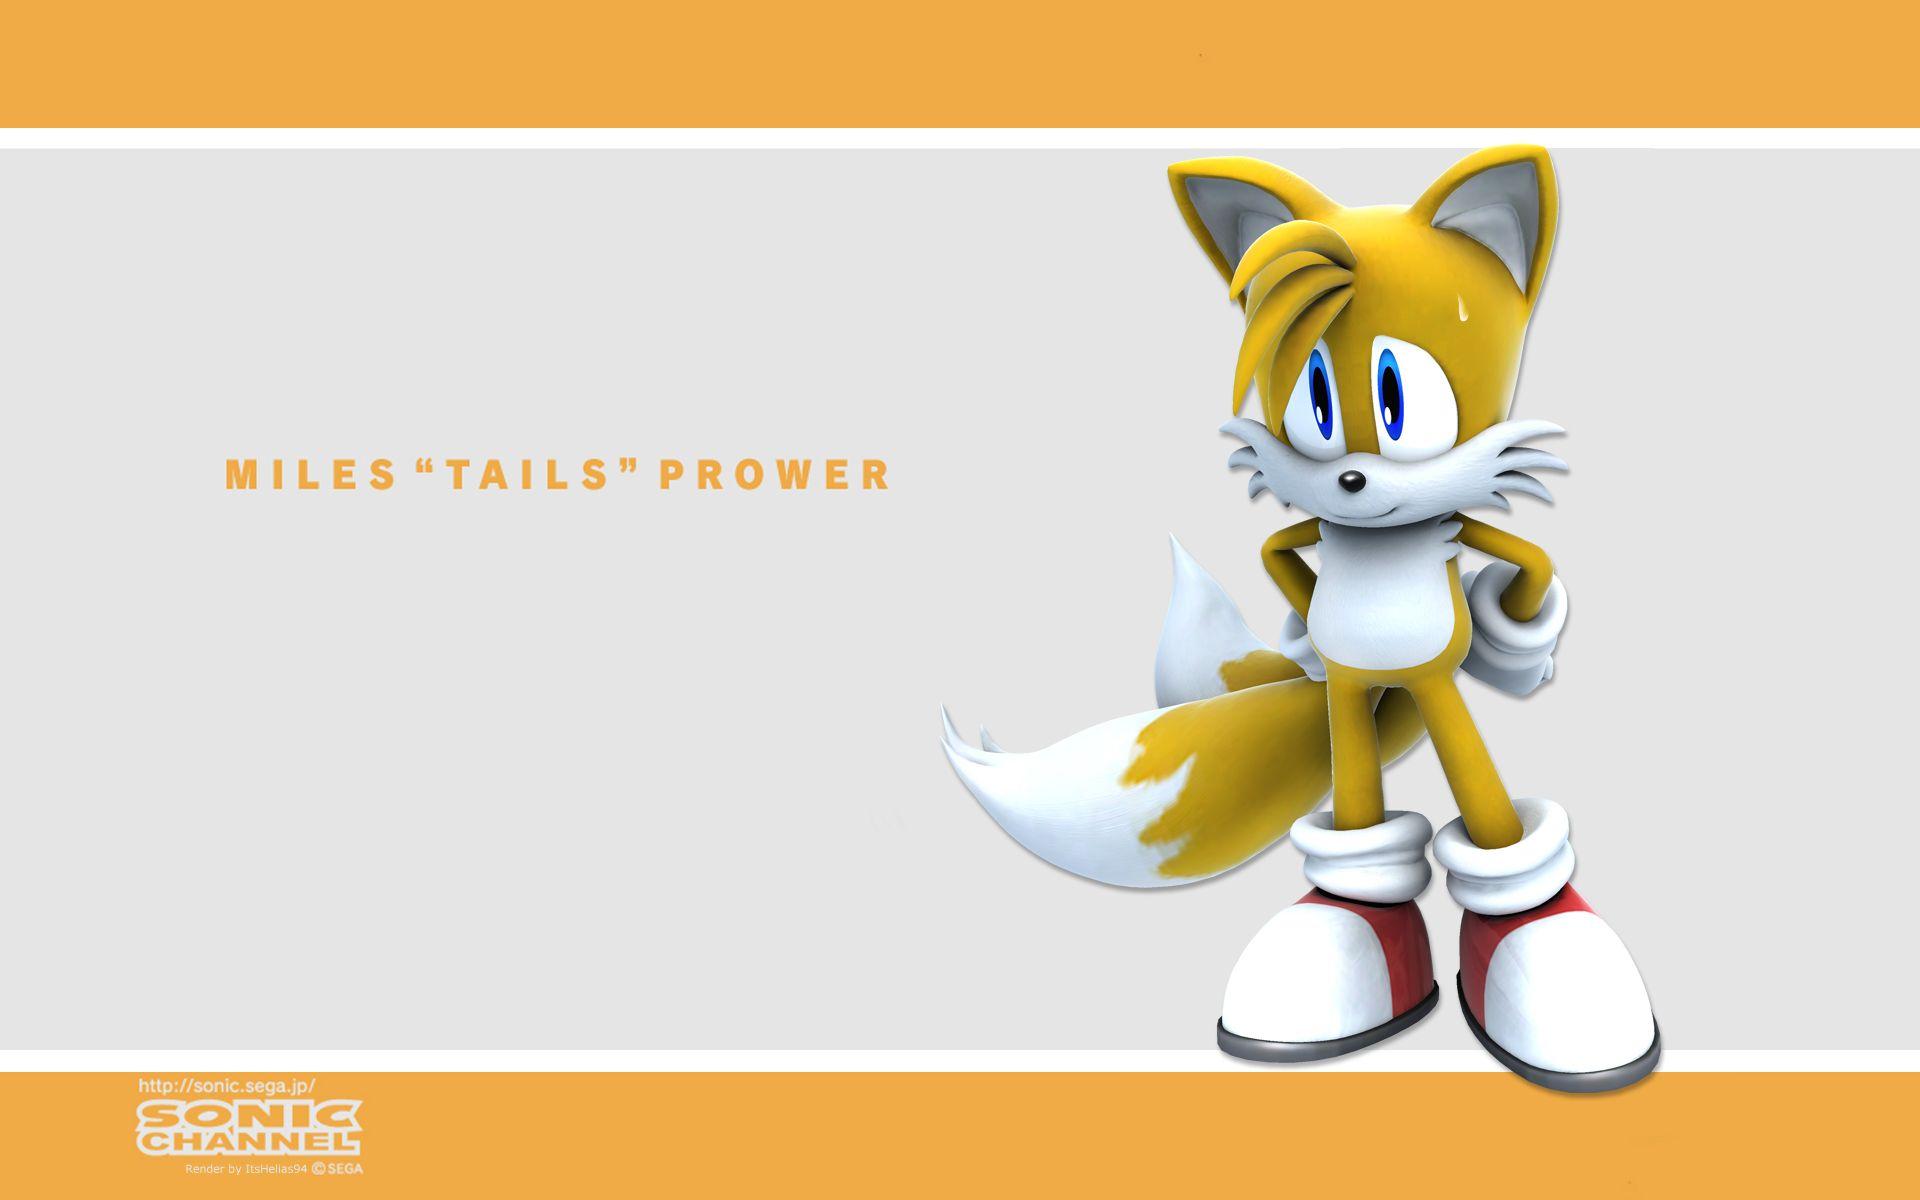 The Miles Tails Prower love thread